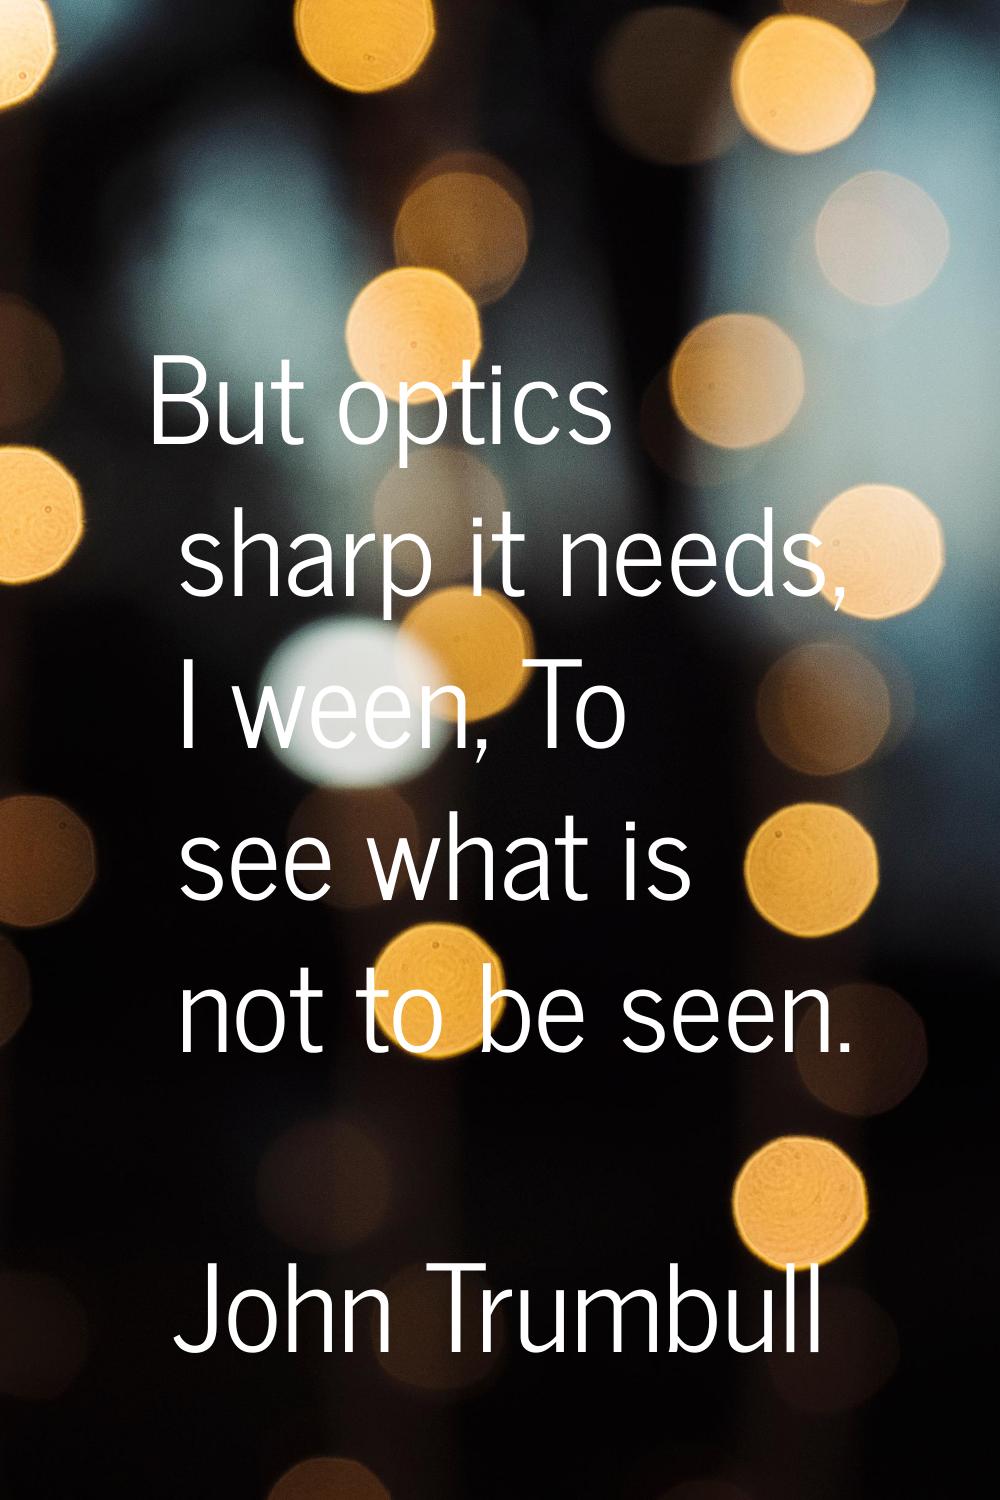 But optics sharp it needs, I ween, To see what is not to be seen.